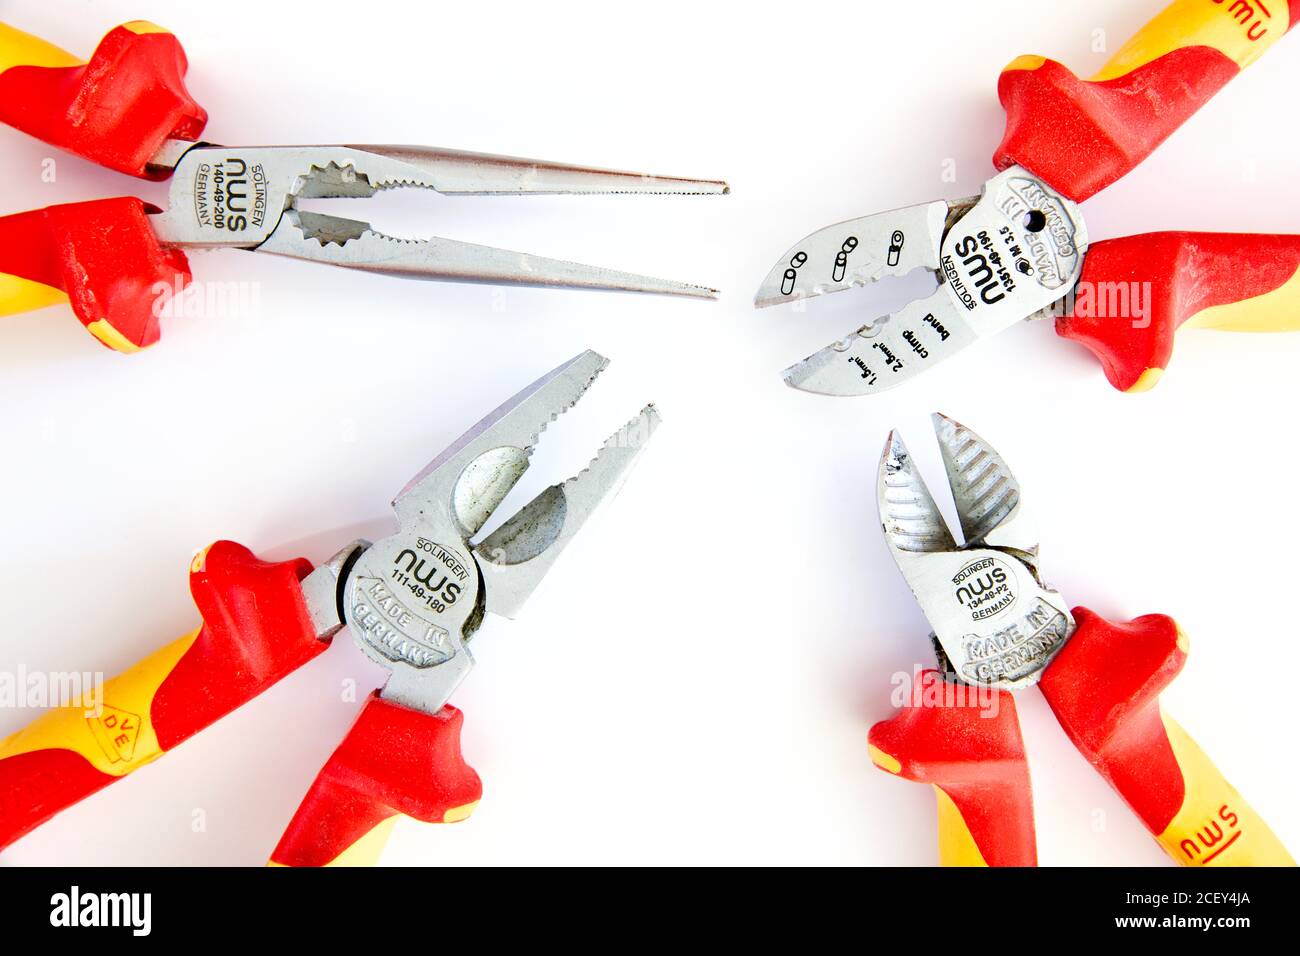 Electricians Pliers & Cutters Stock Photo